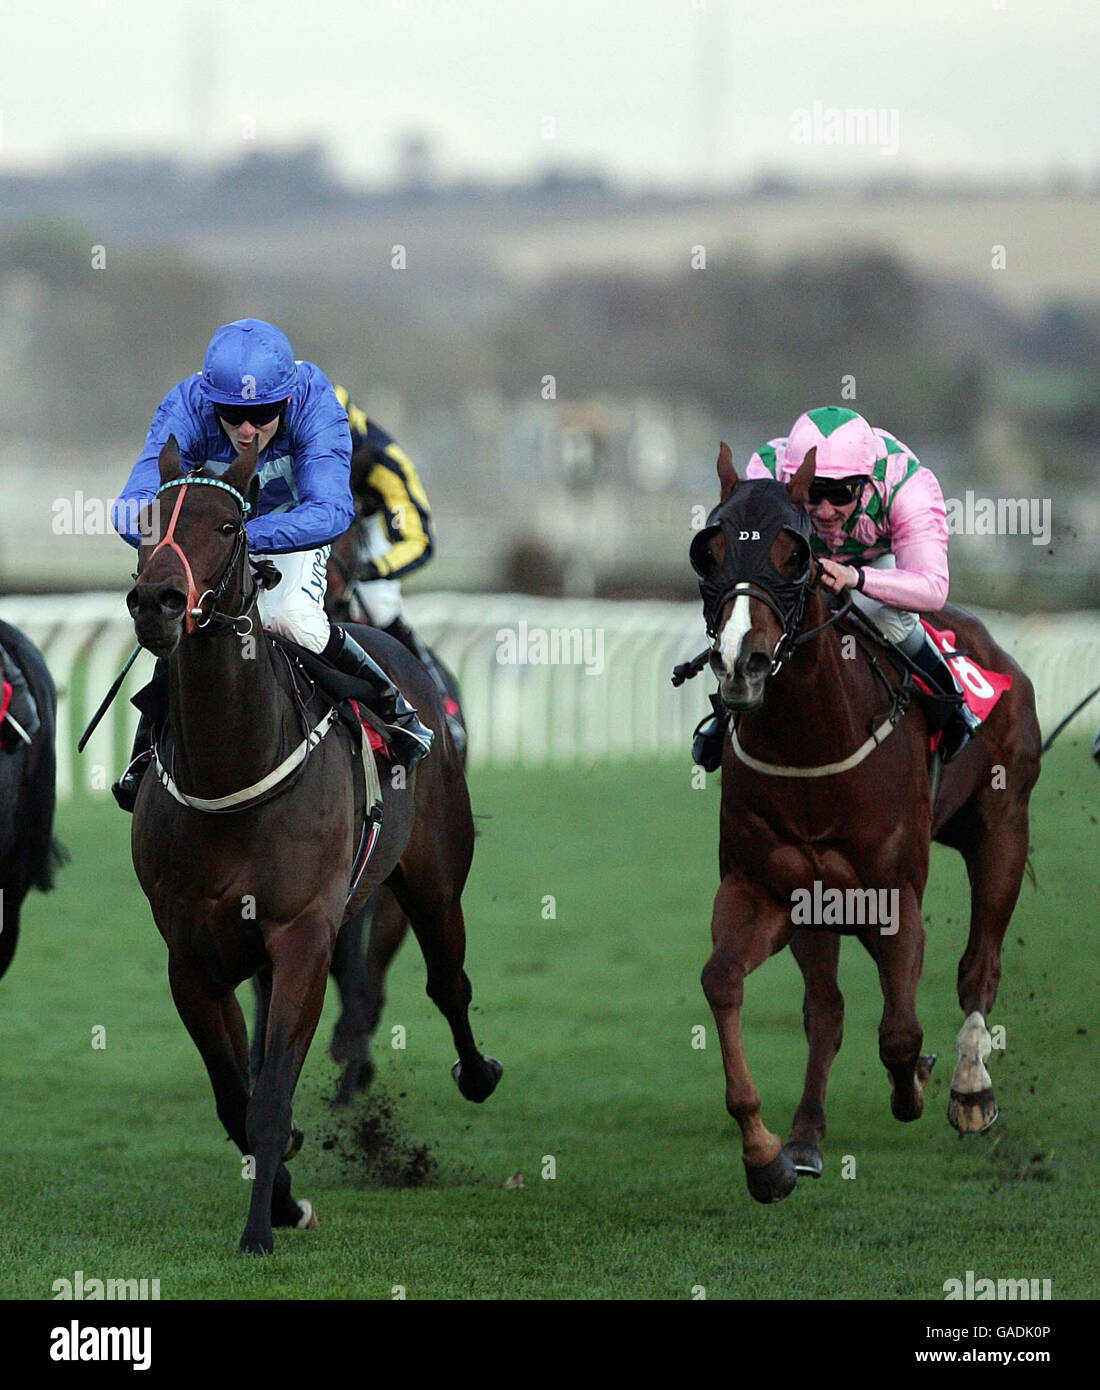 Crocodile Bay ridden by Jamie Spencer (left) and Spinning ridden by Seb Sanders both fail to win the Redman Fisher Handicap at Musselburgh Racecourse. Stock Photo